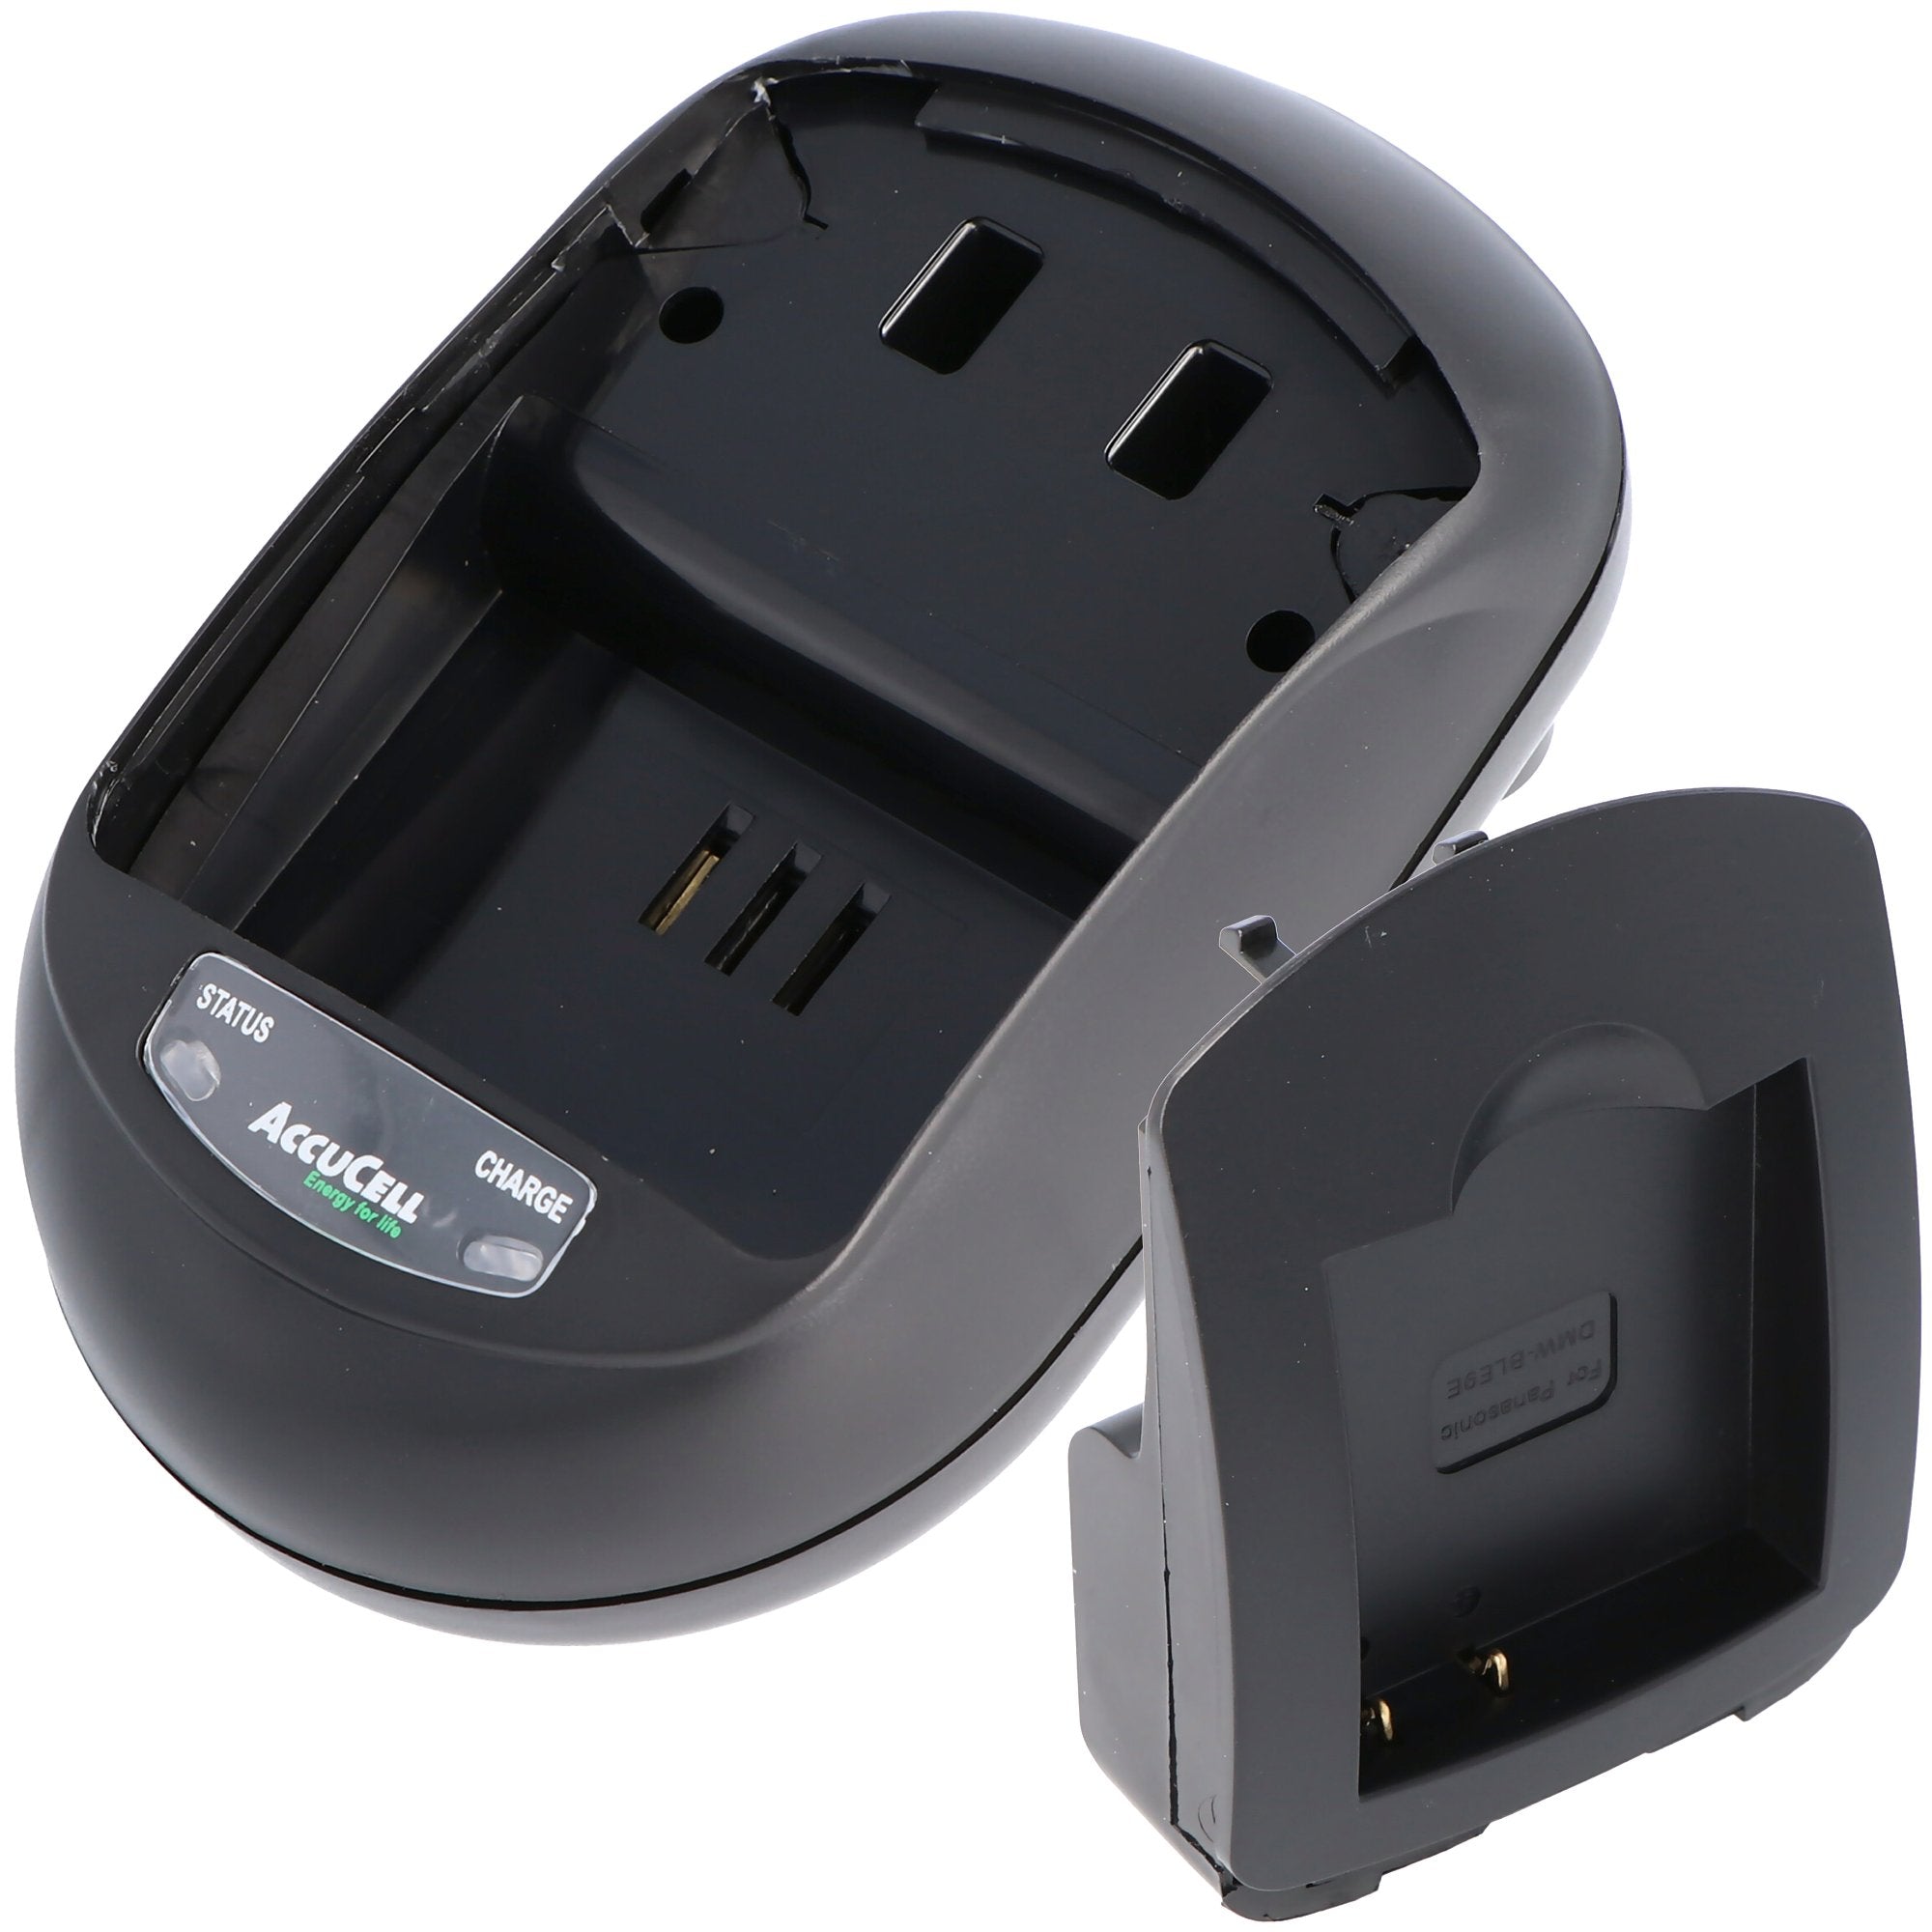 Quick charger suitable for Panasonic DMW-BLE9, DMW-BLE9E, DMW-BLE9GK, DMW-BLE9PP, DMW-BLG10, DMW-BLG